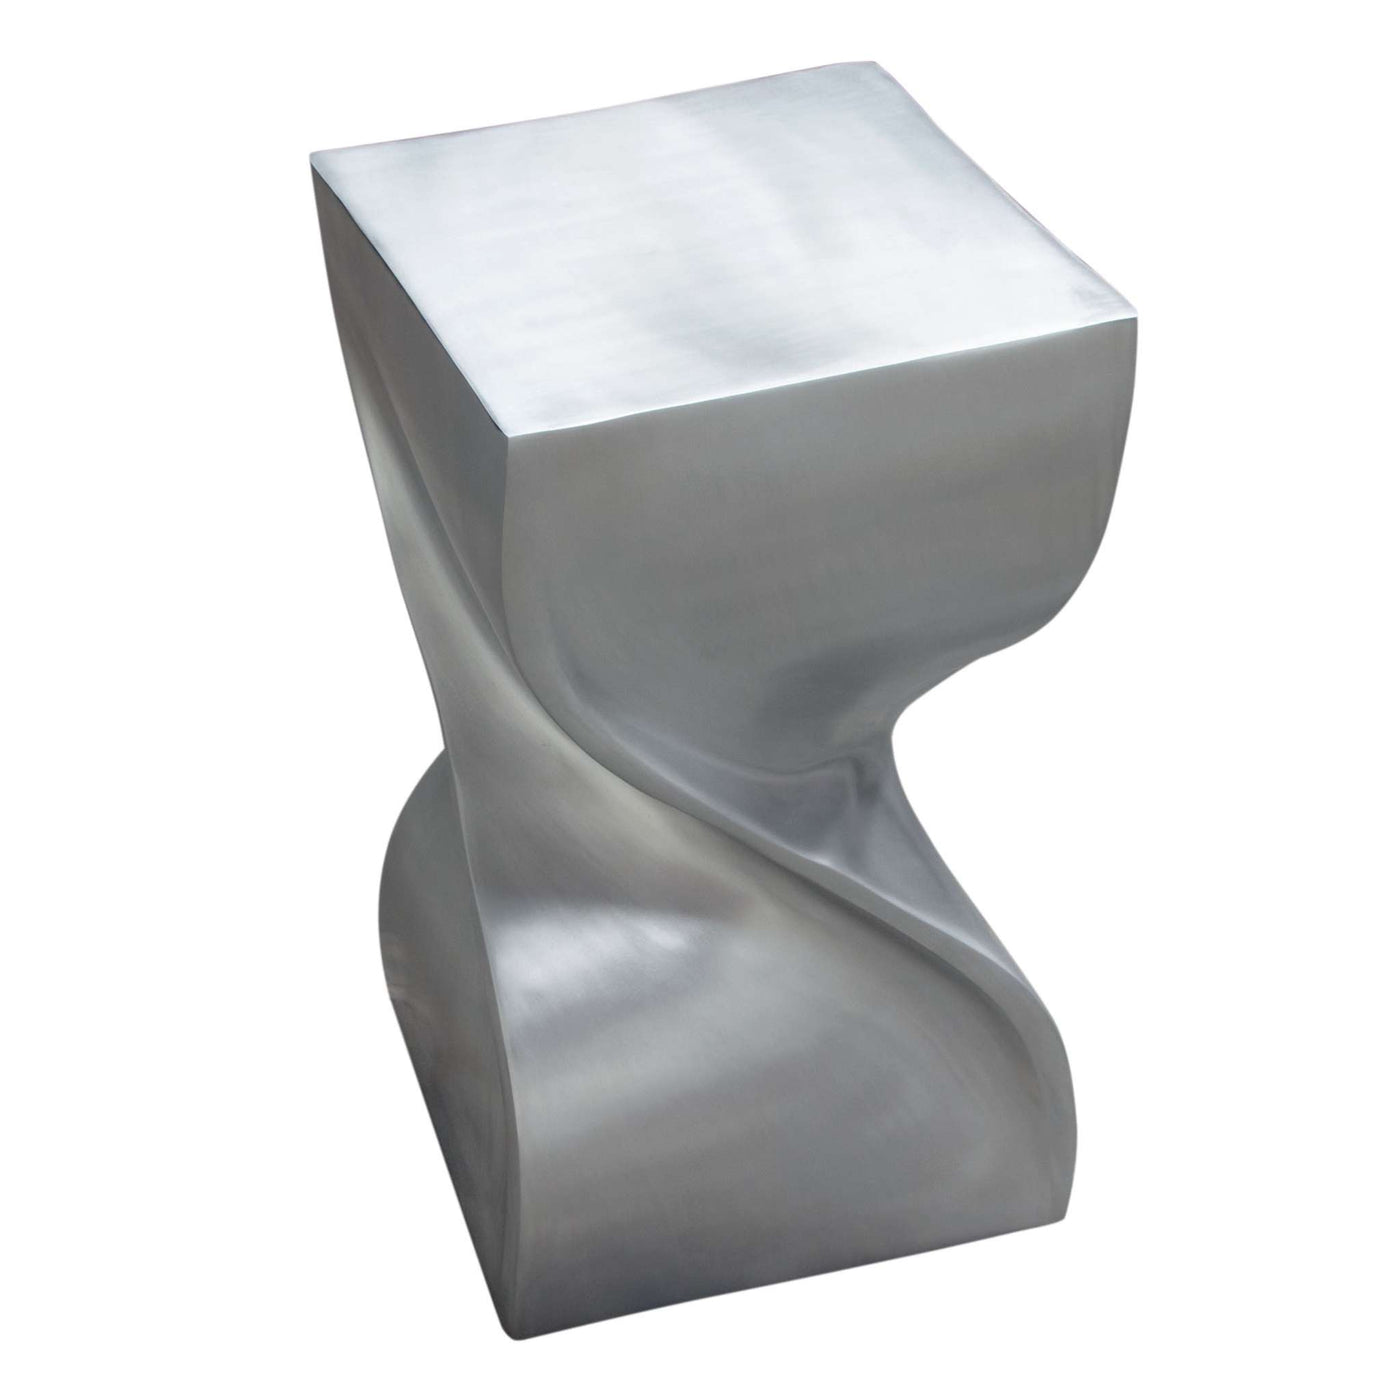 Spire Square Accent Table in Casted Aluminum in Nickel Finish by Diamond Sofa